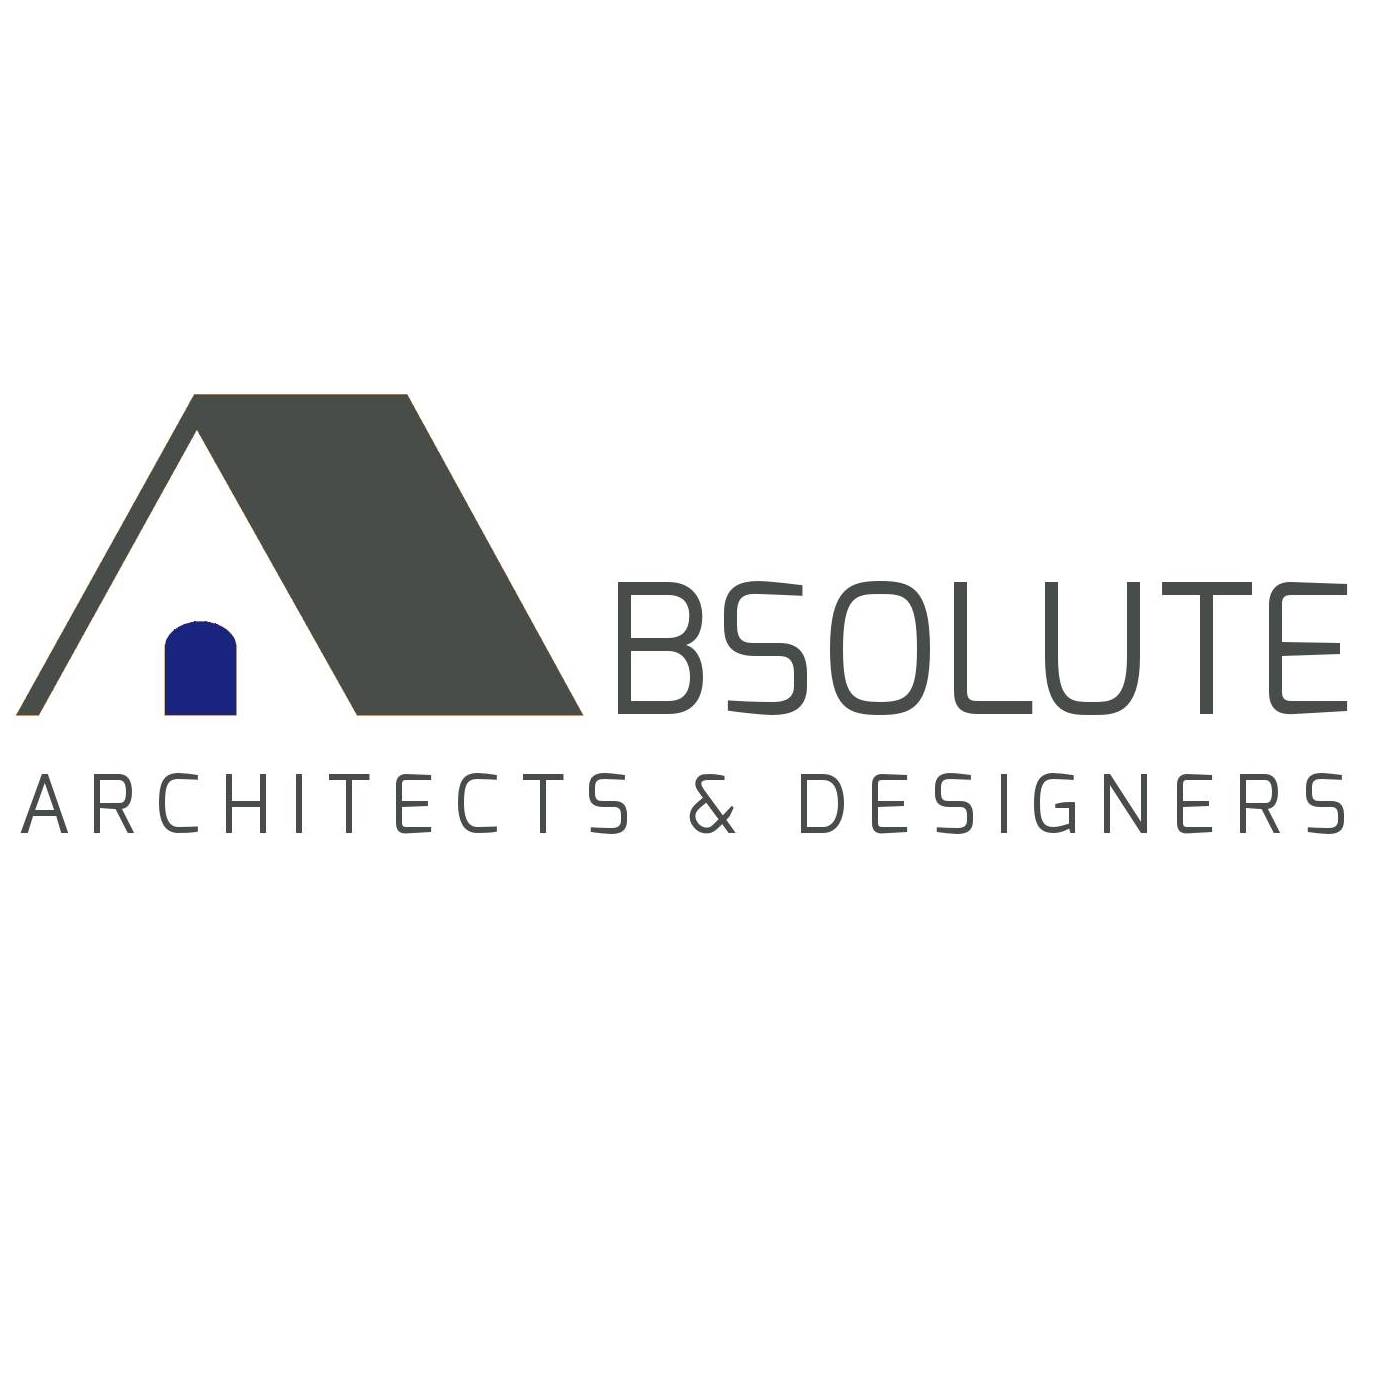 ABSOLUTE Architects and Designers|Architect|Professional Services